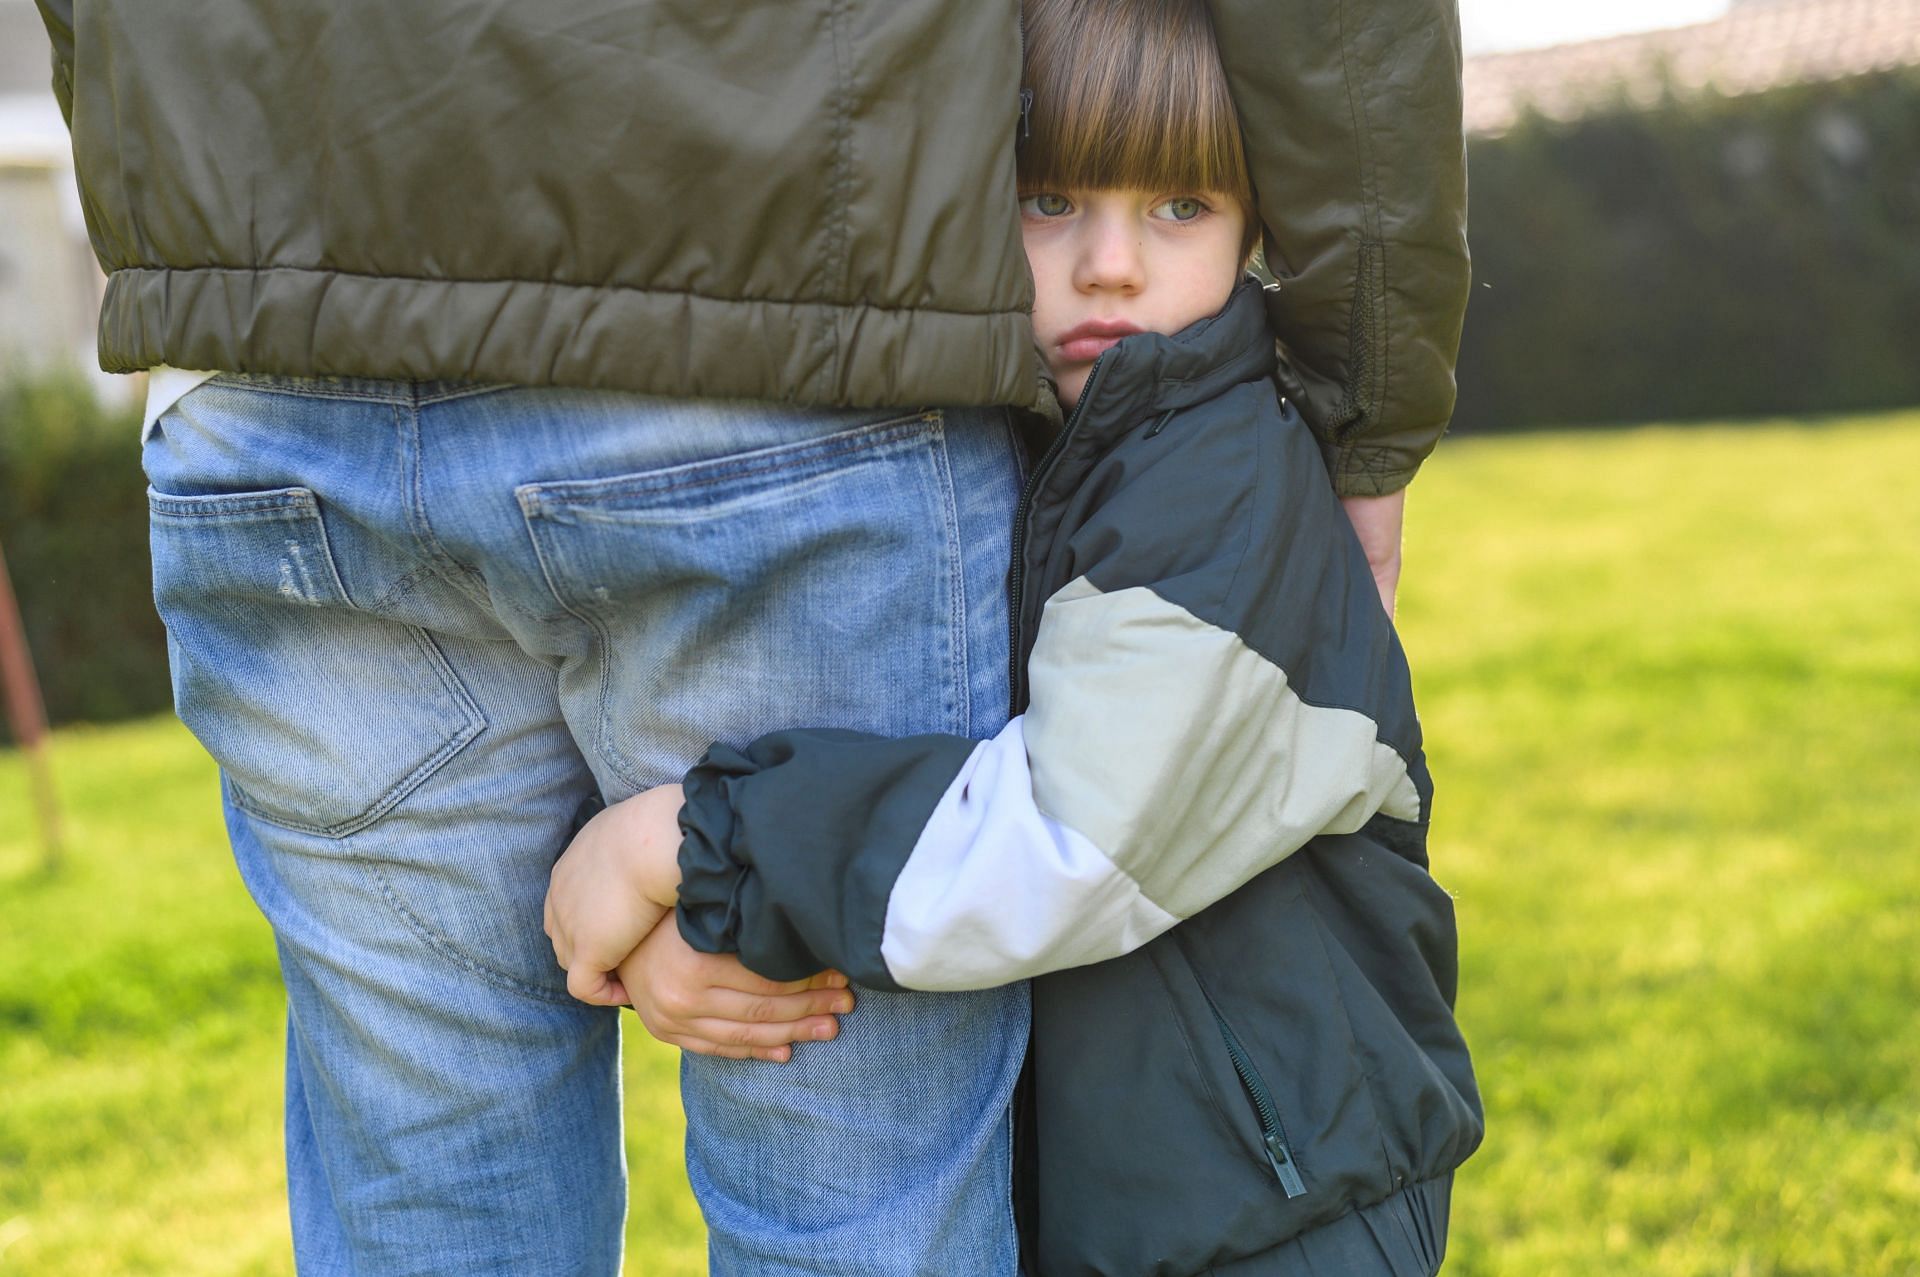 Children have trouble connecting or attaching to others. (Image via Freepik/ Freepik)